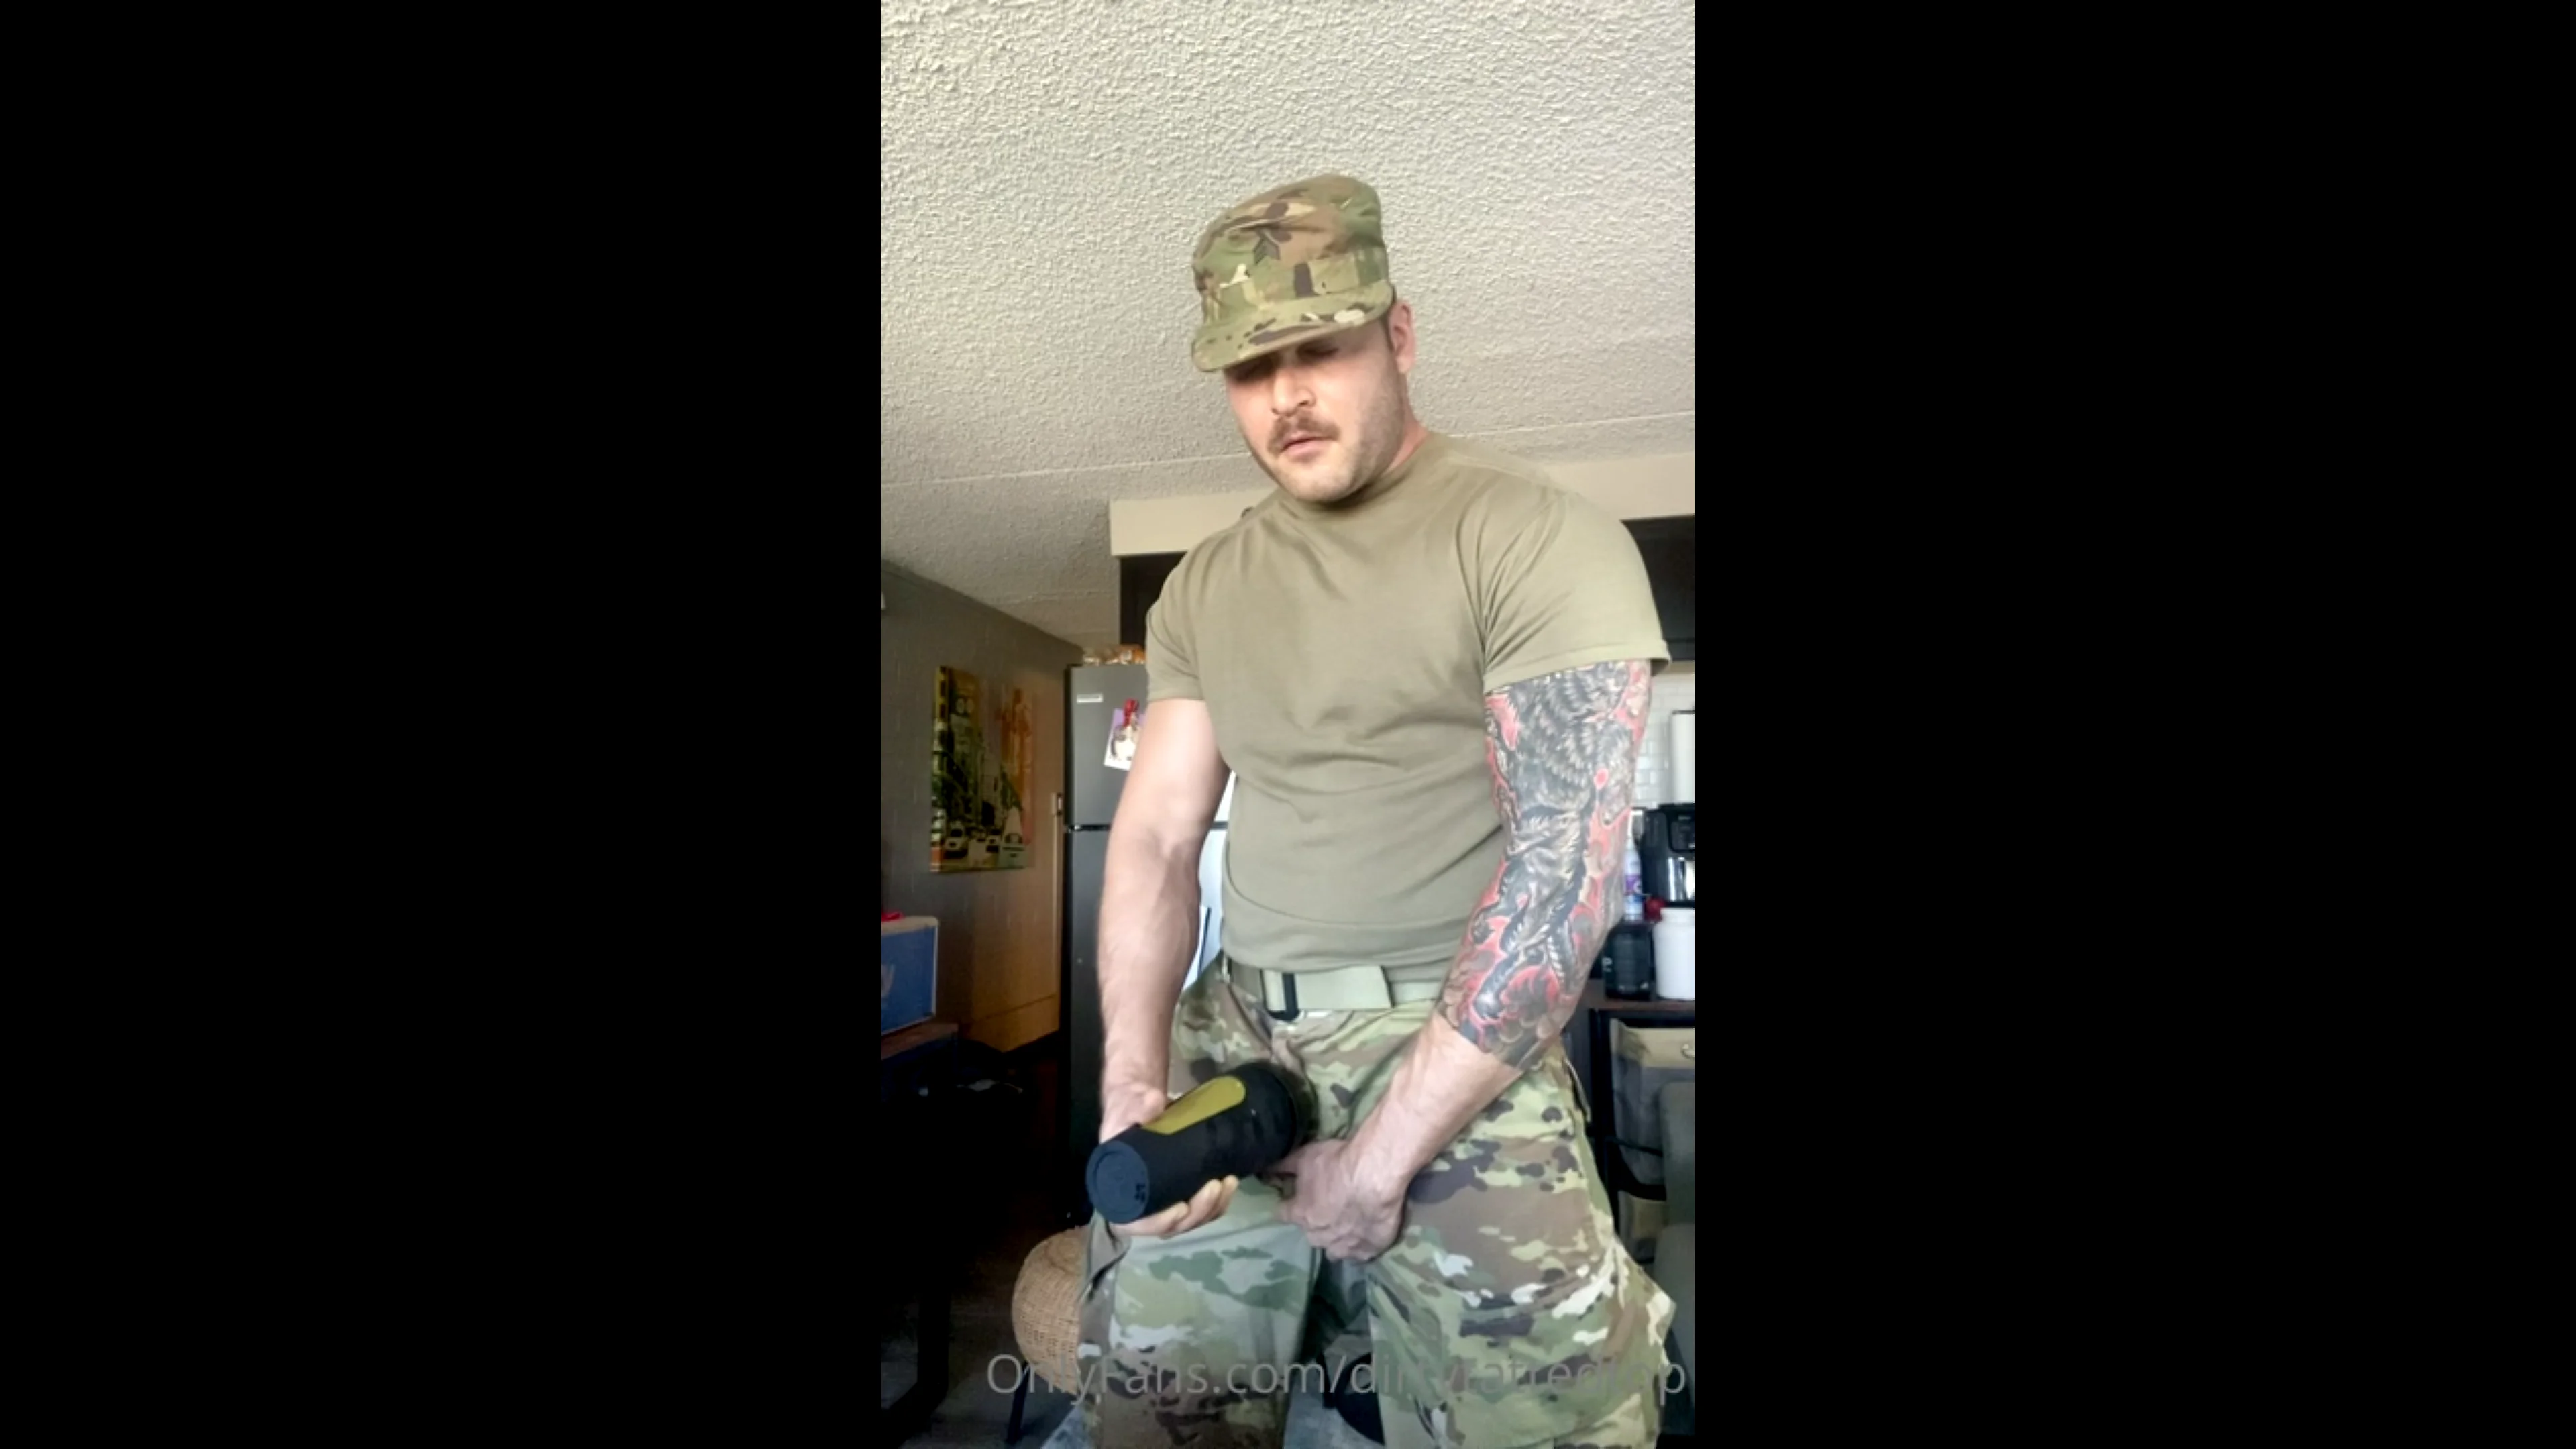 Using my toy till I cum while wearing my uniform - Luca Hunter (dirtytattedtop) - JustTheGays.com - Stream the newest and hottest gay videos for free from your favorite performers from OnlyFans and Just for Fans